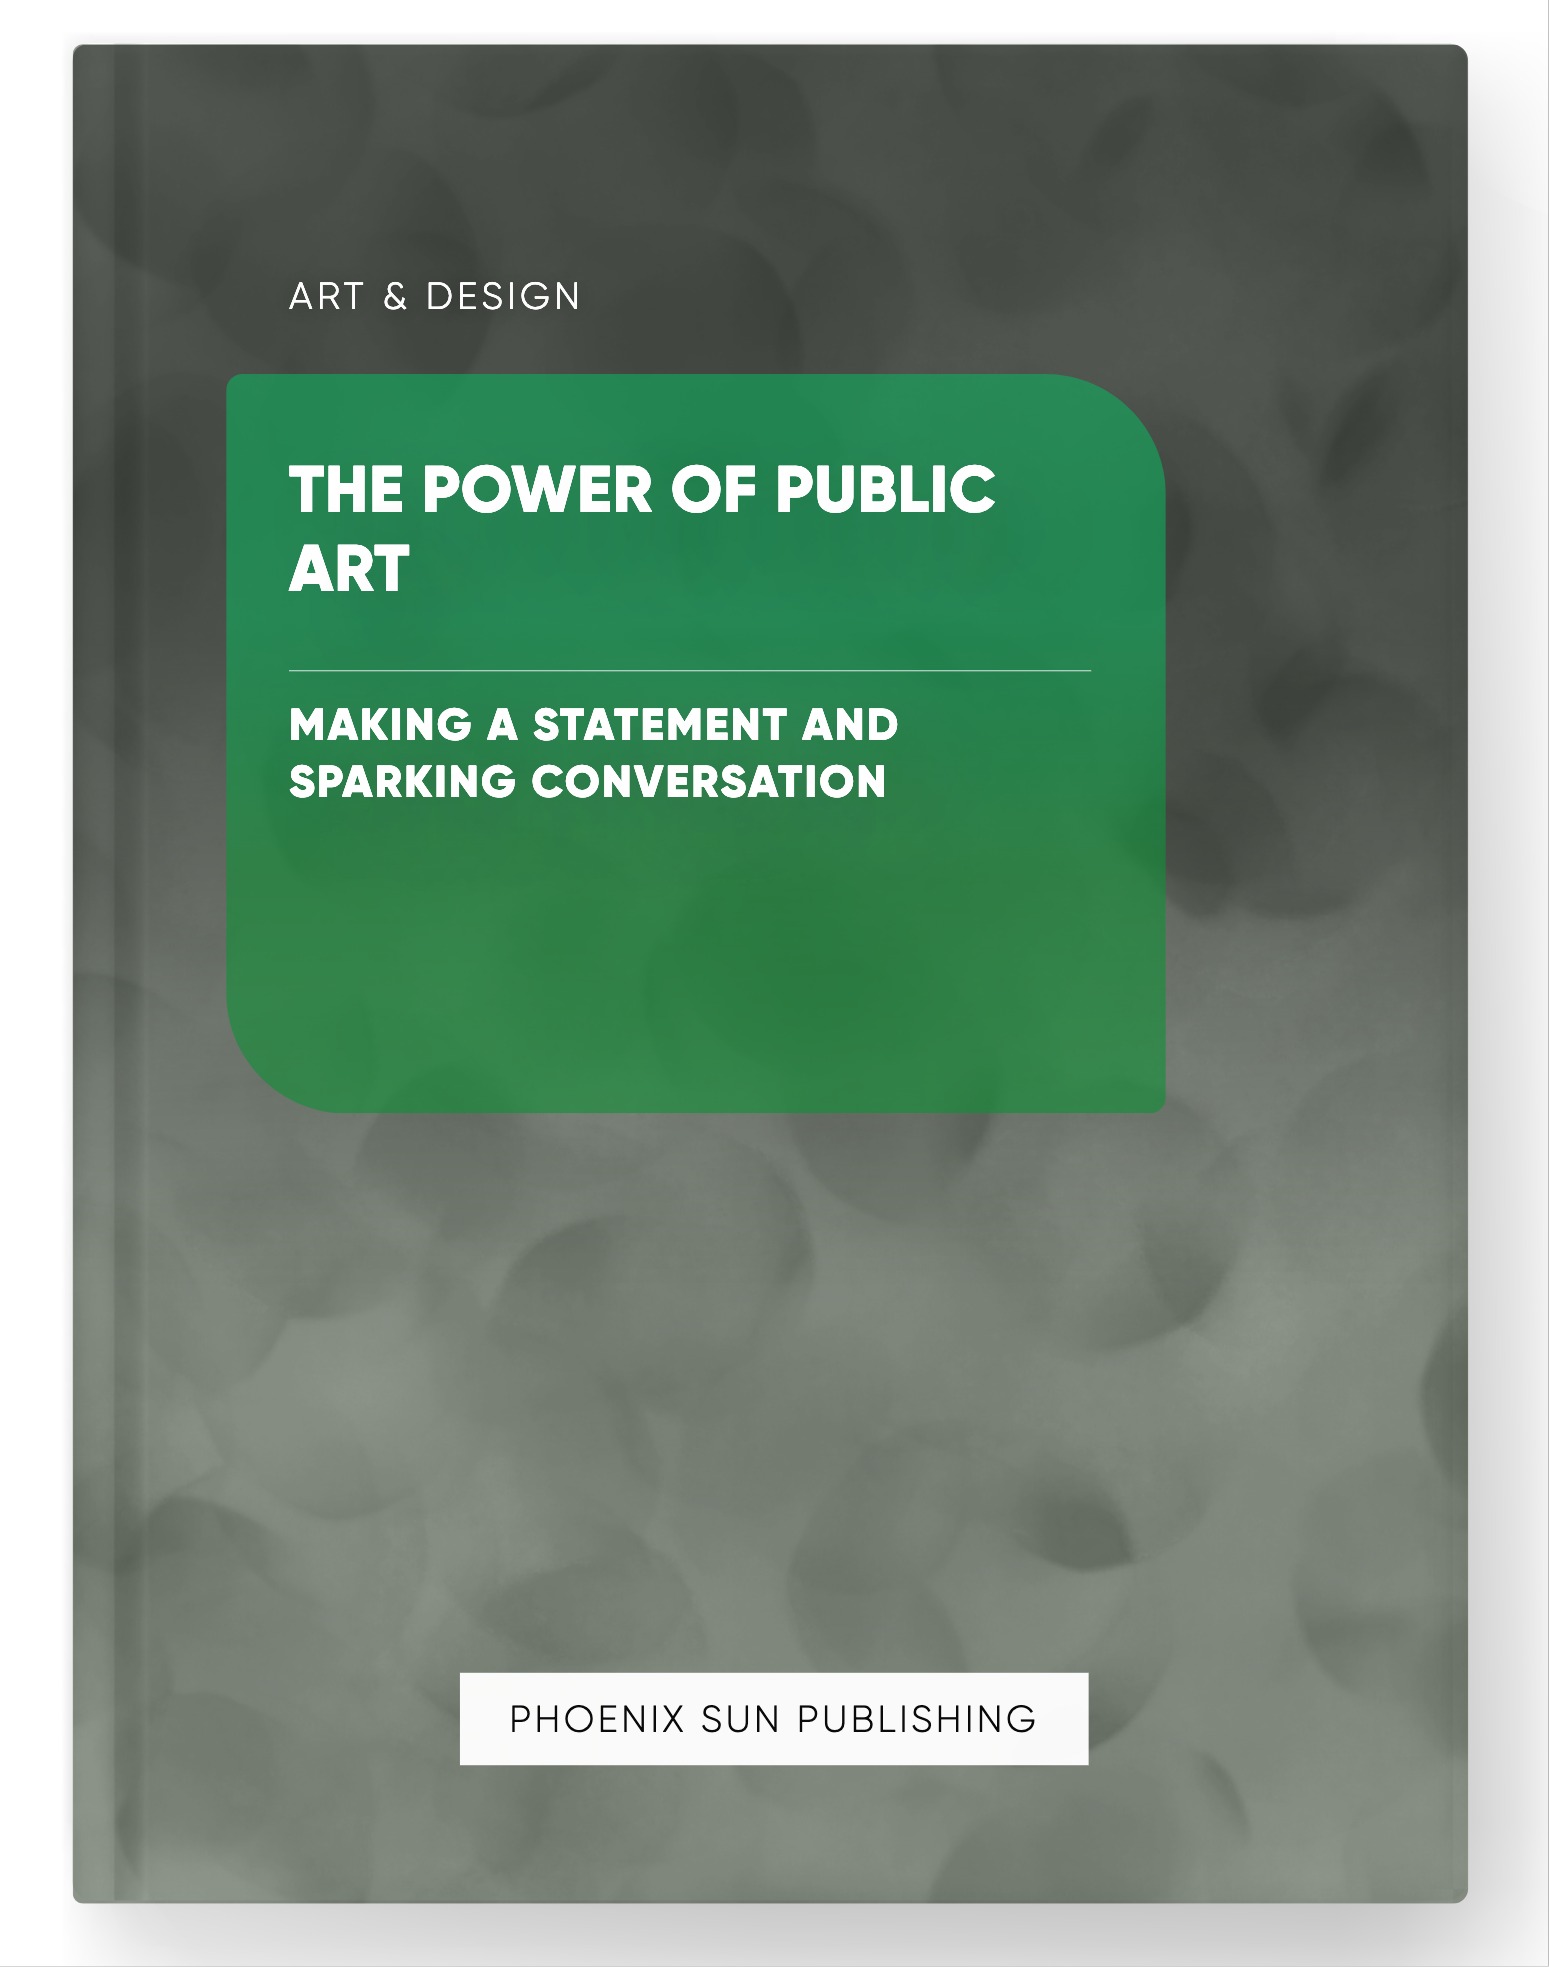 The Power of Public Art – Making a Statement and Sparking Conversation